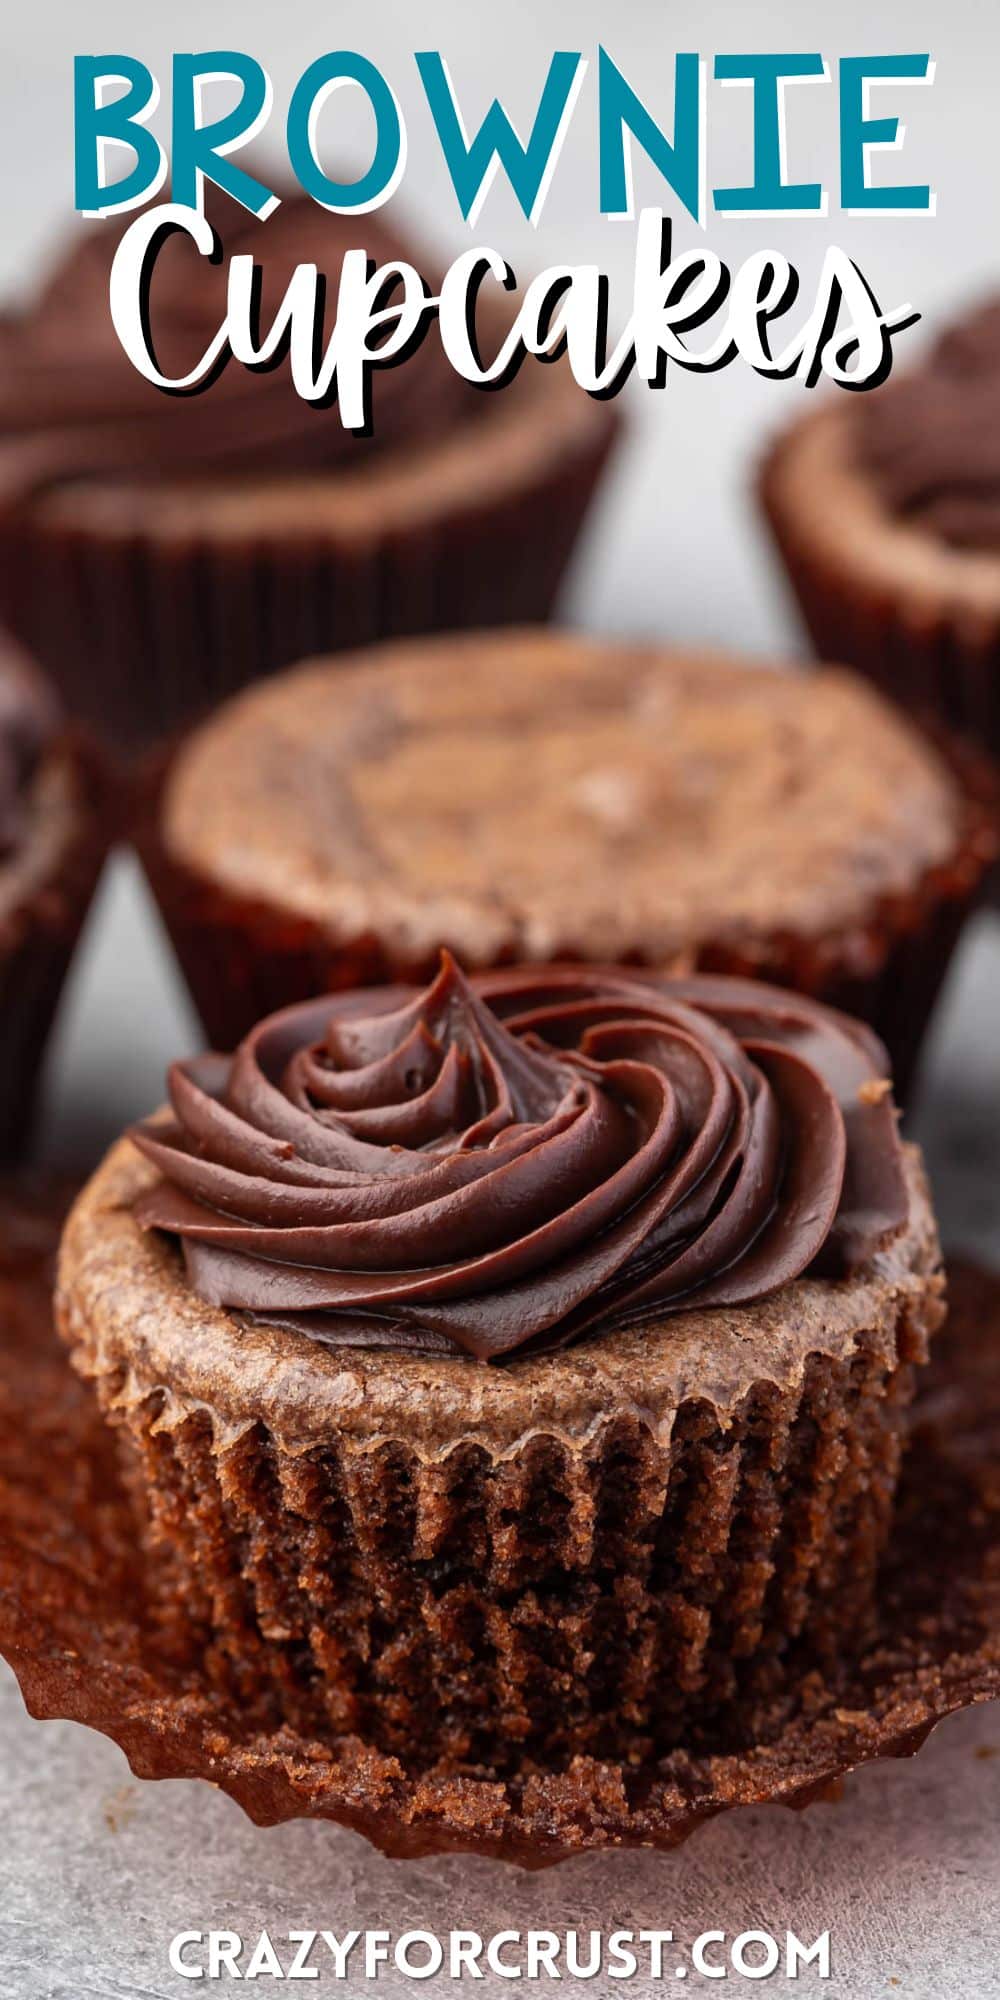 cupcake made of brownies with chocolate frosting on top with words on the image.